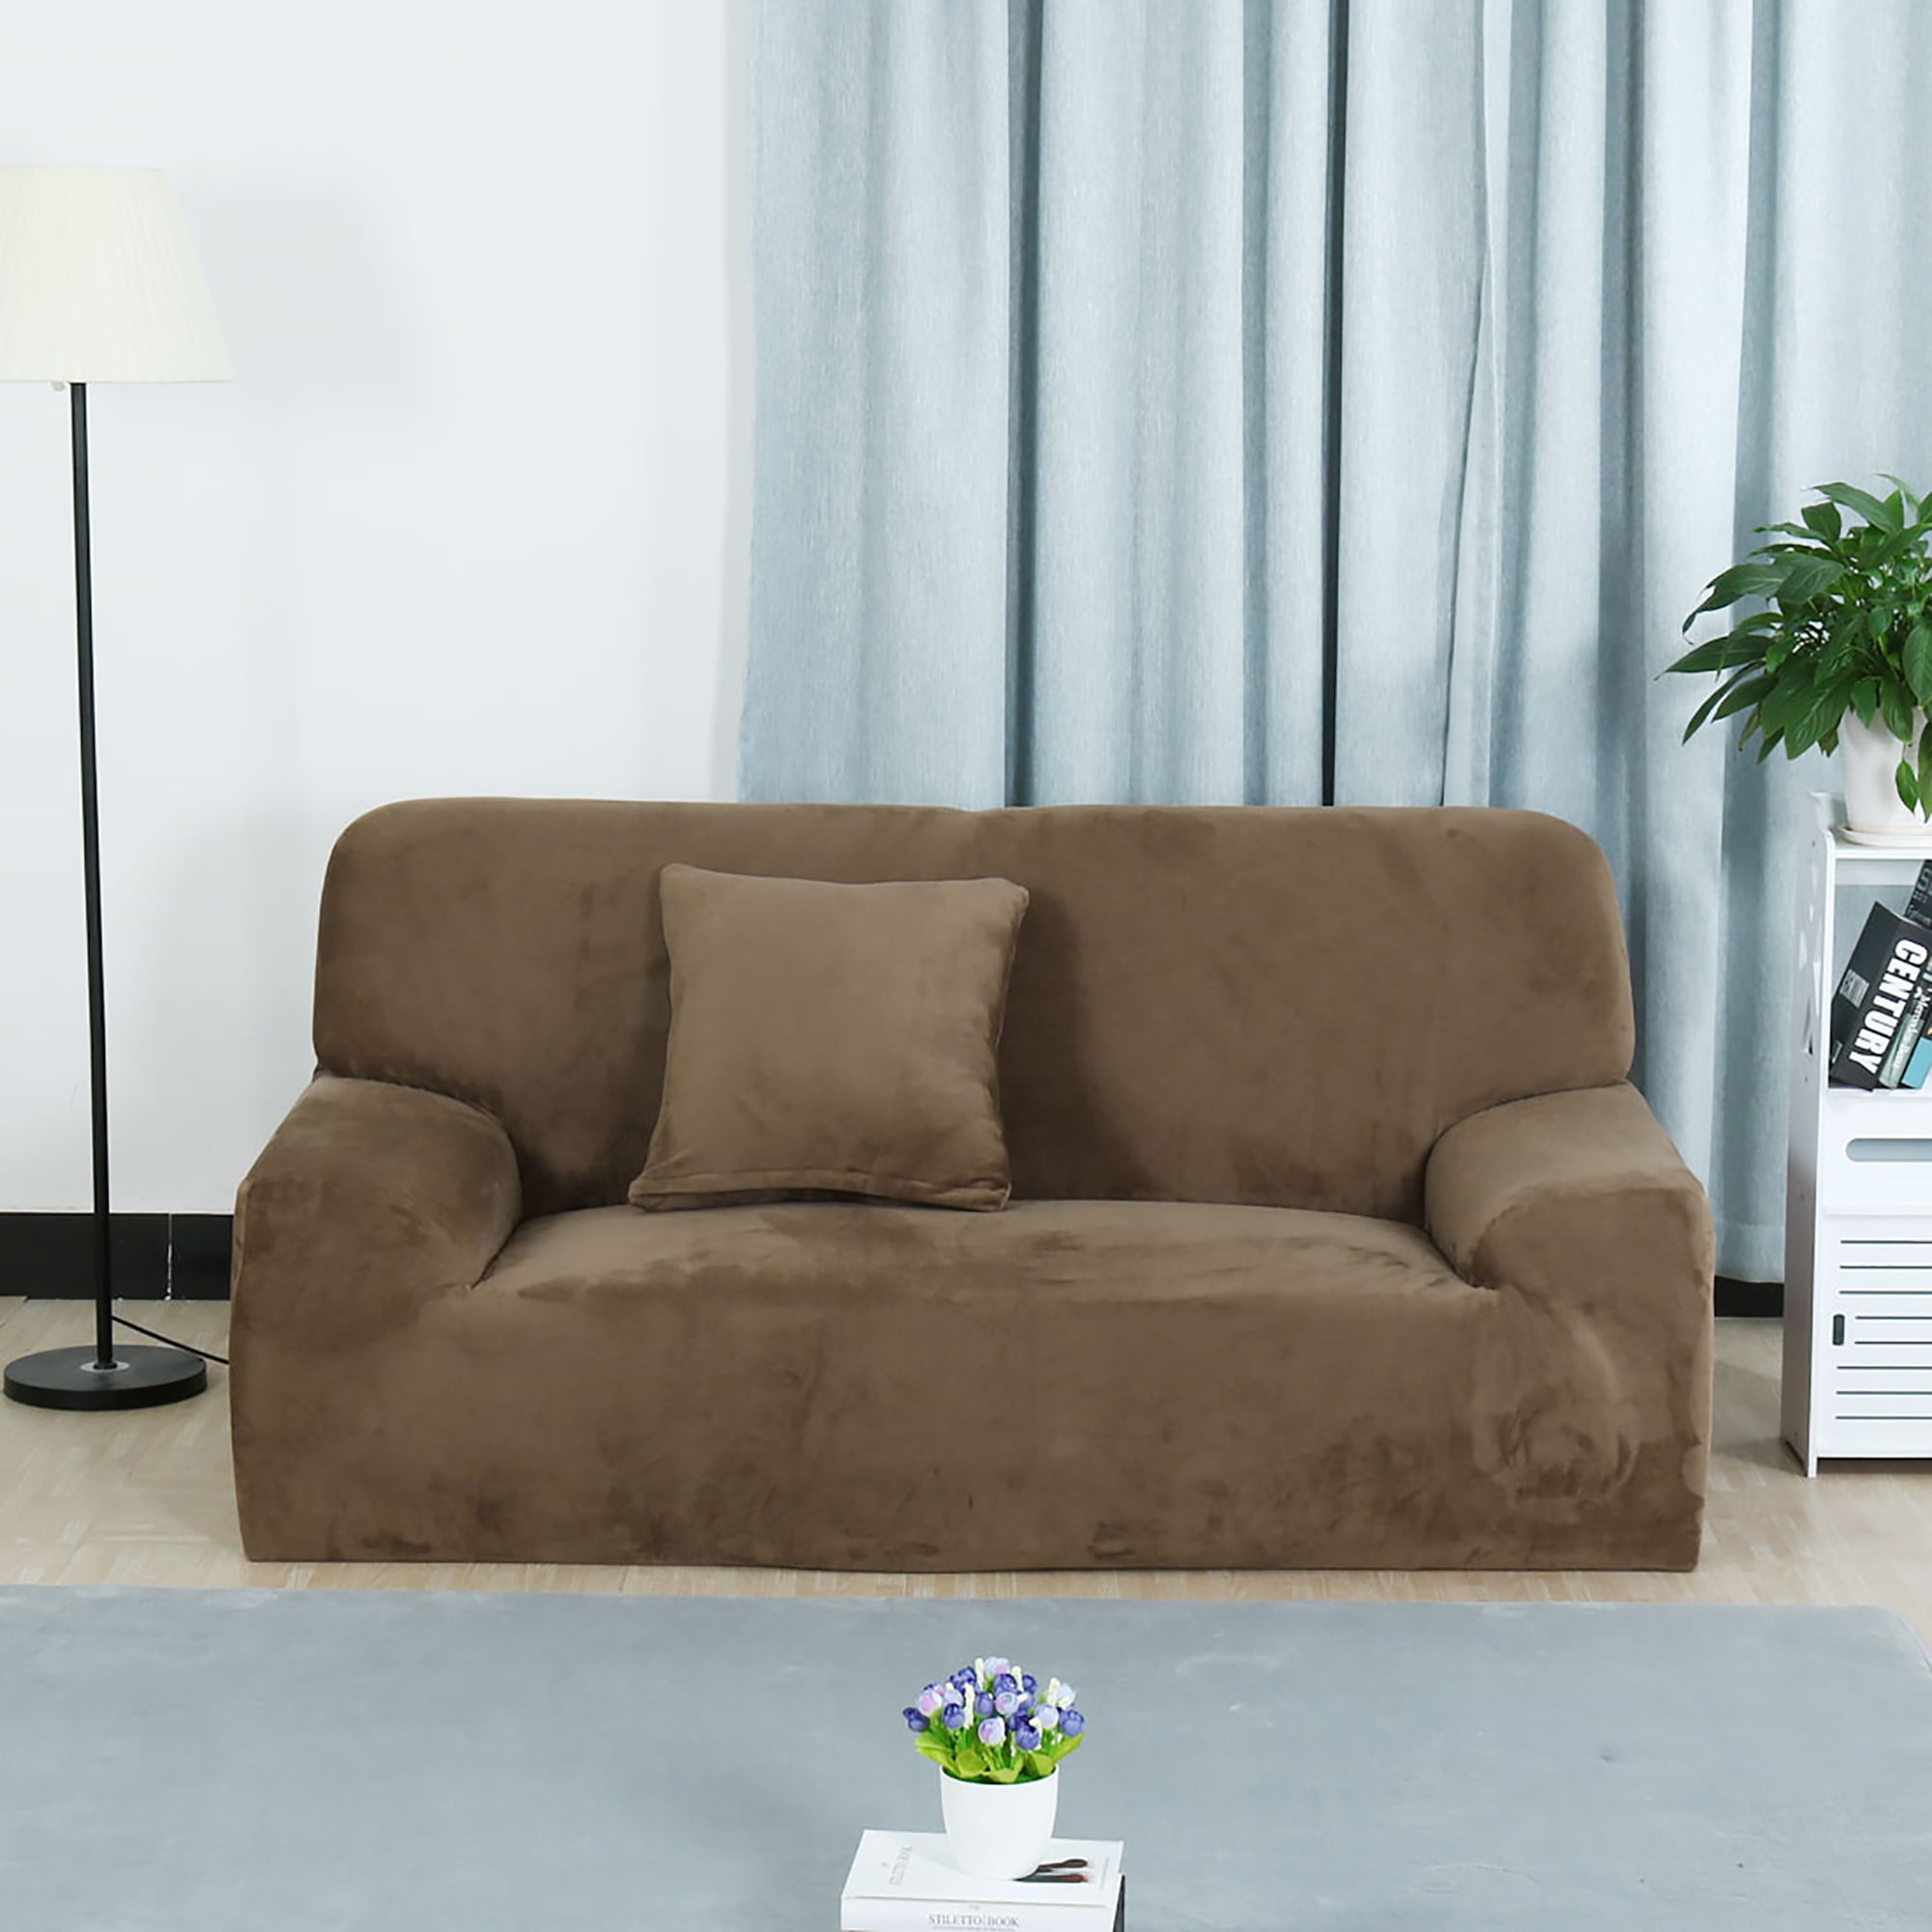 Details about   Breathable Sofa Covers Slip-resistence Sofa Towels Couch Cushion Room Slipcovers 